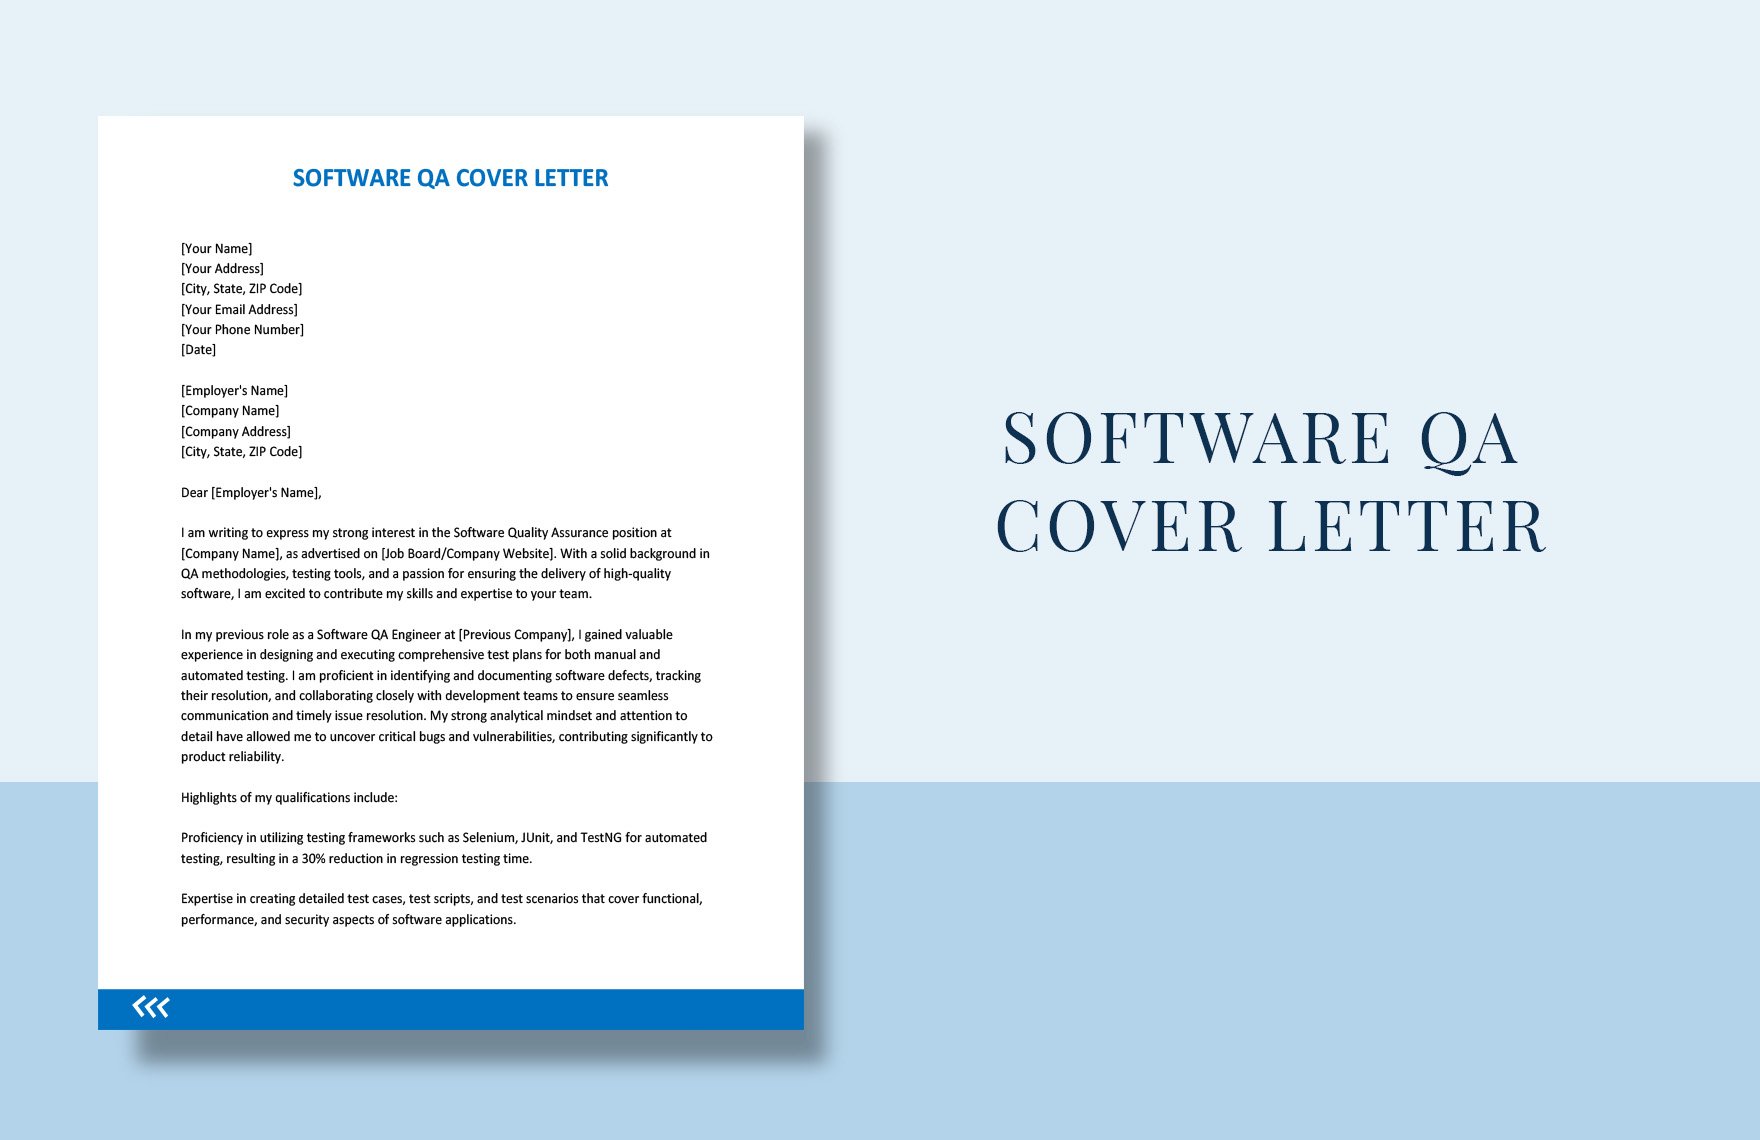 Software QA Cover Letter in Word, Google Docs